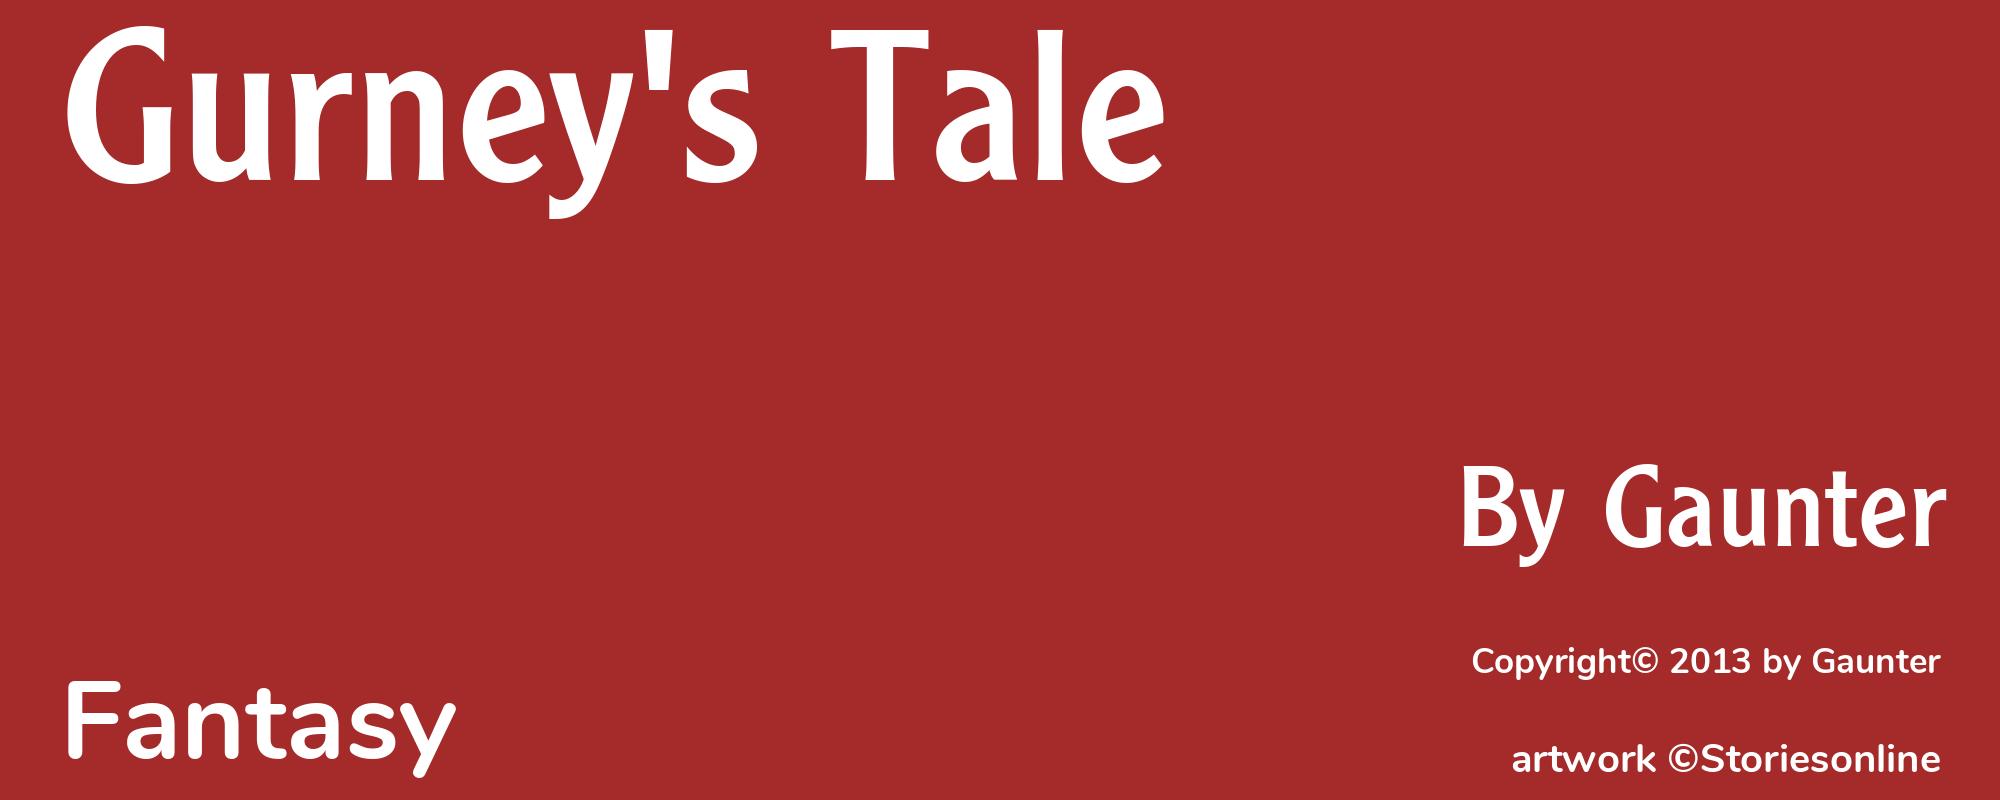 Gurney's Tale - Cover